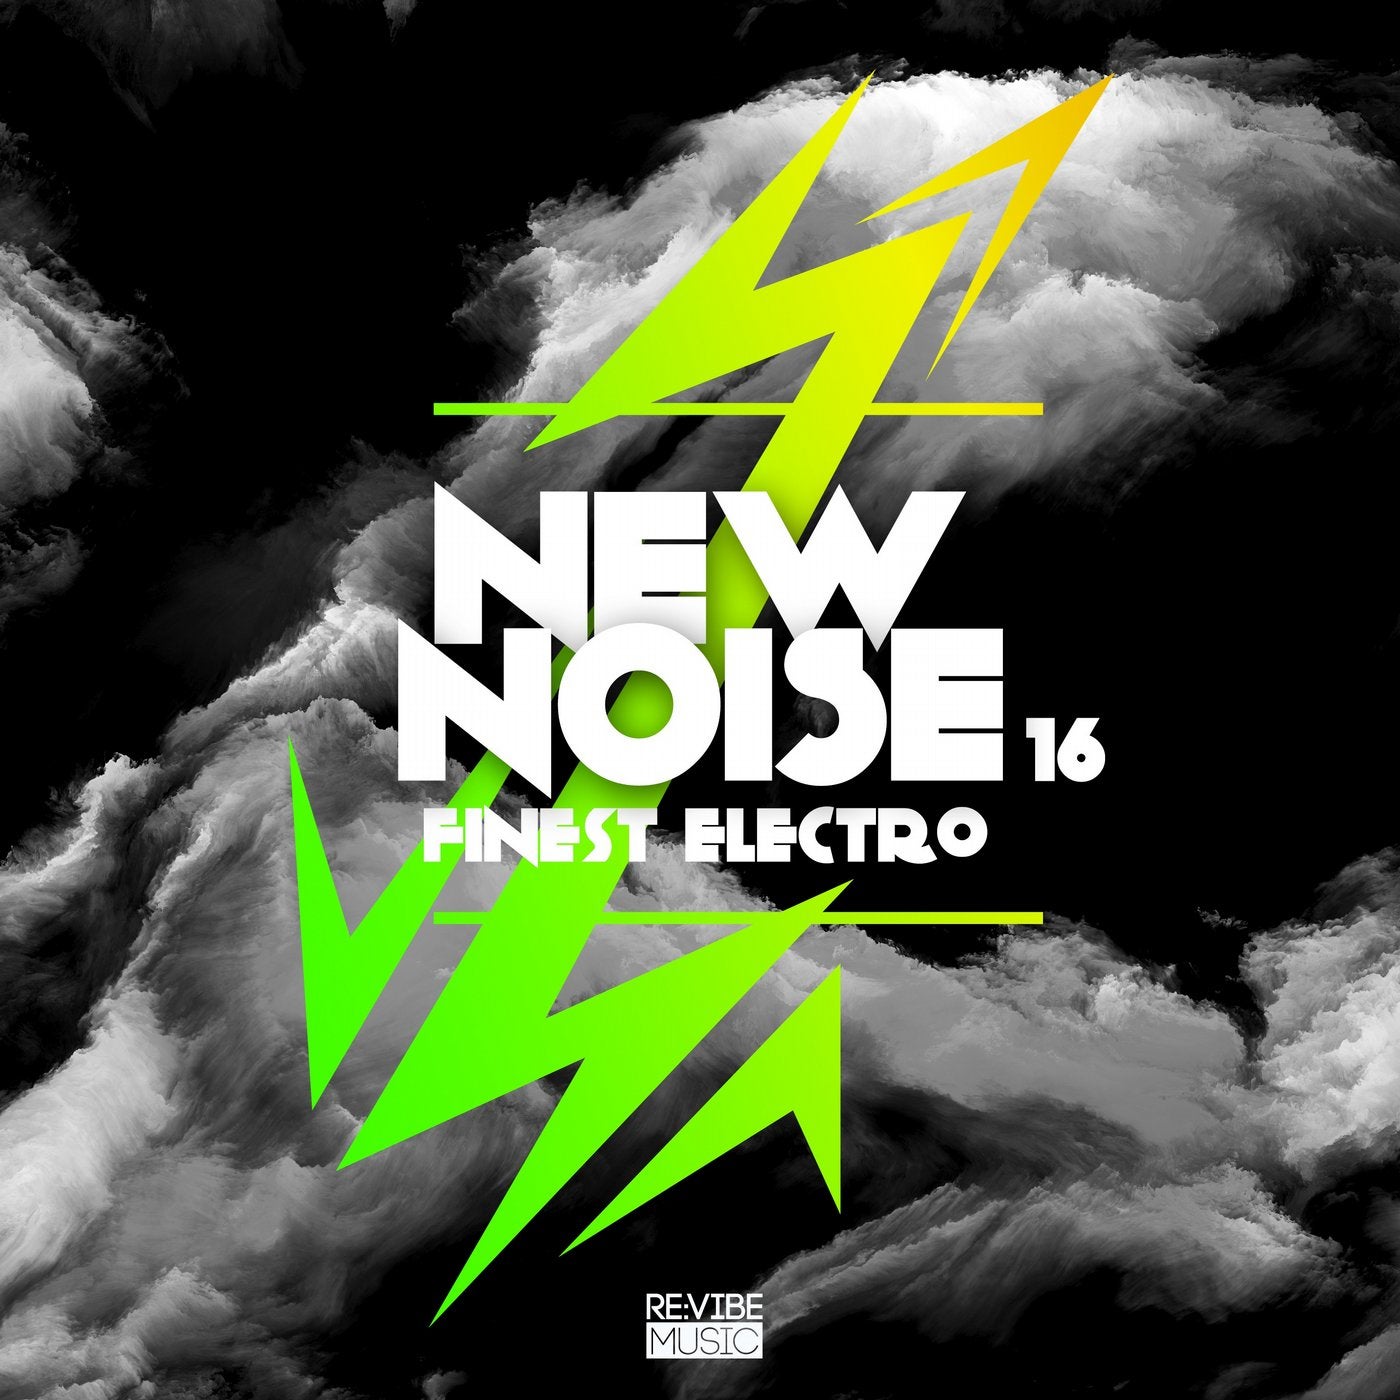 New Noise - Finest Electro, Vol. 16